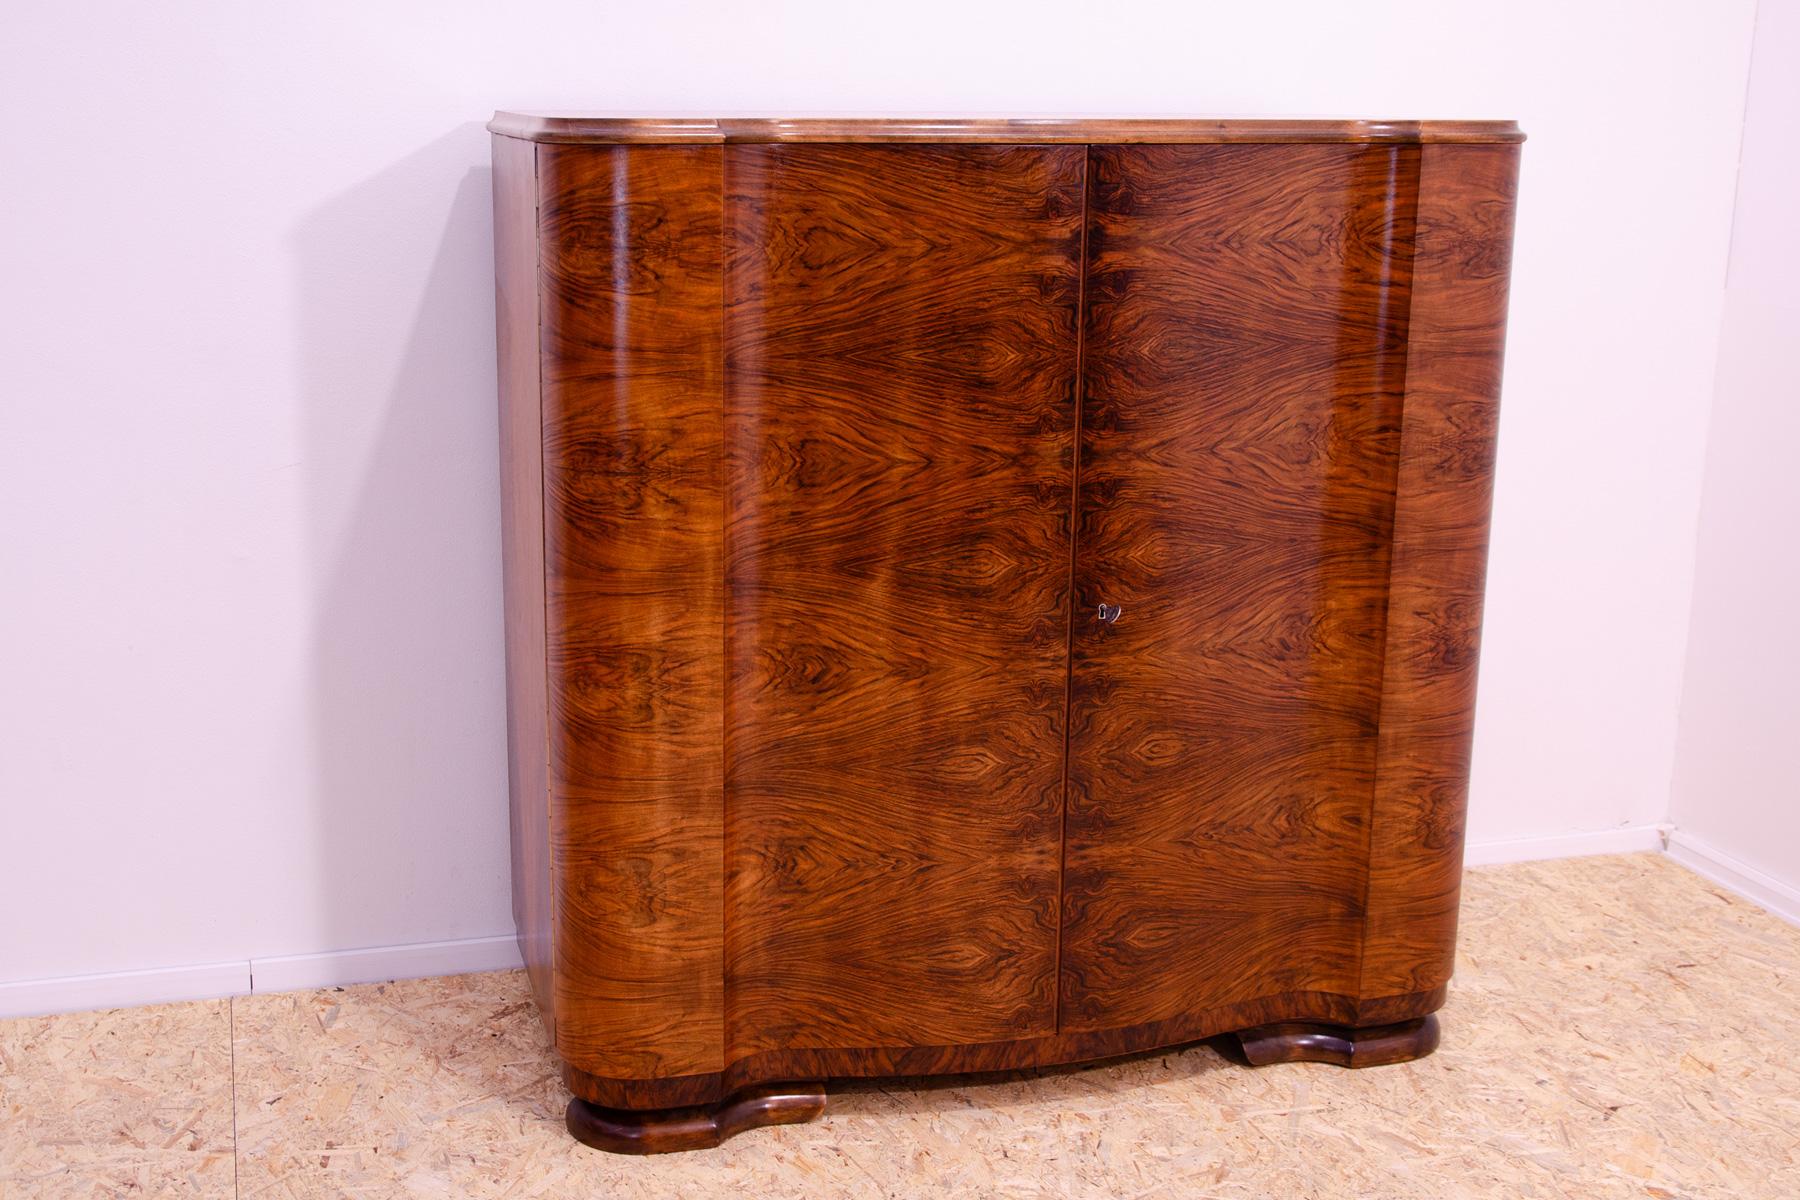 This ART DECO dresser/commode was made in the former Czechoslovakia in 1930´s. It´s made in ART DECO style.

Very simple and beautiful design corresponds to the ART DECO design period. Made of walnut wood.

It´s in excellent condition, it has been